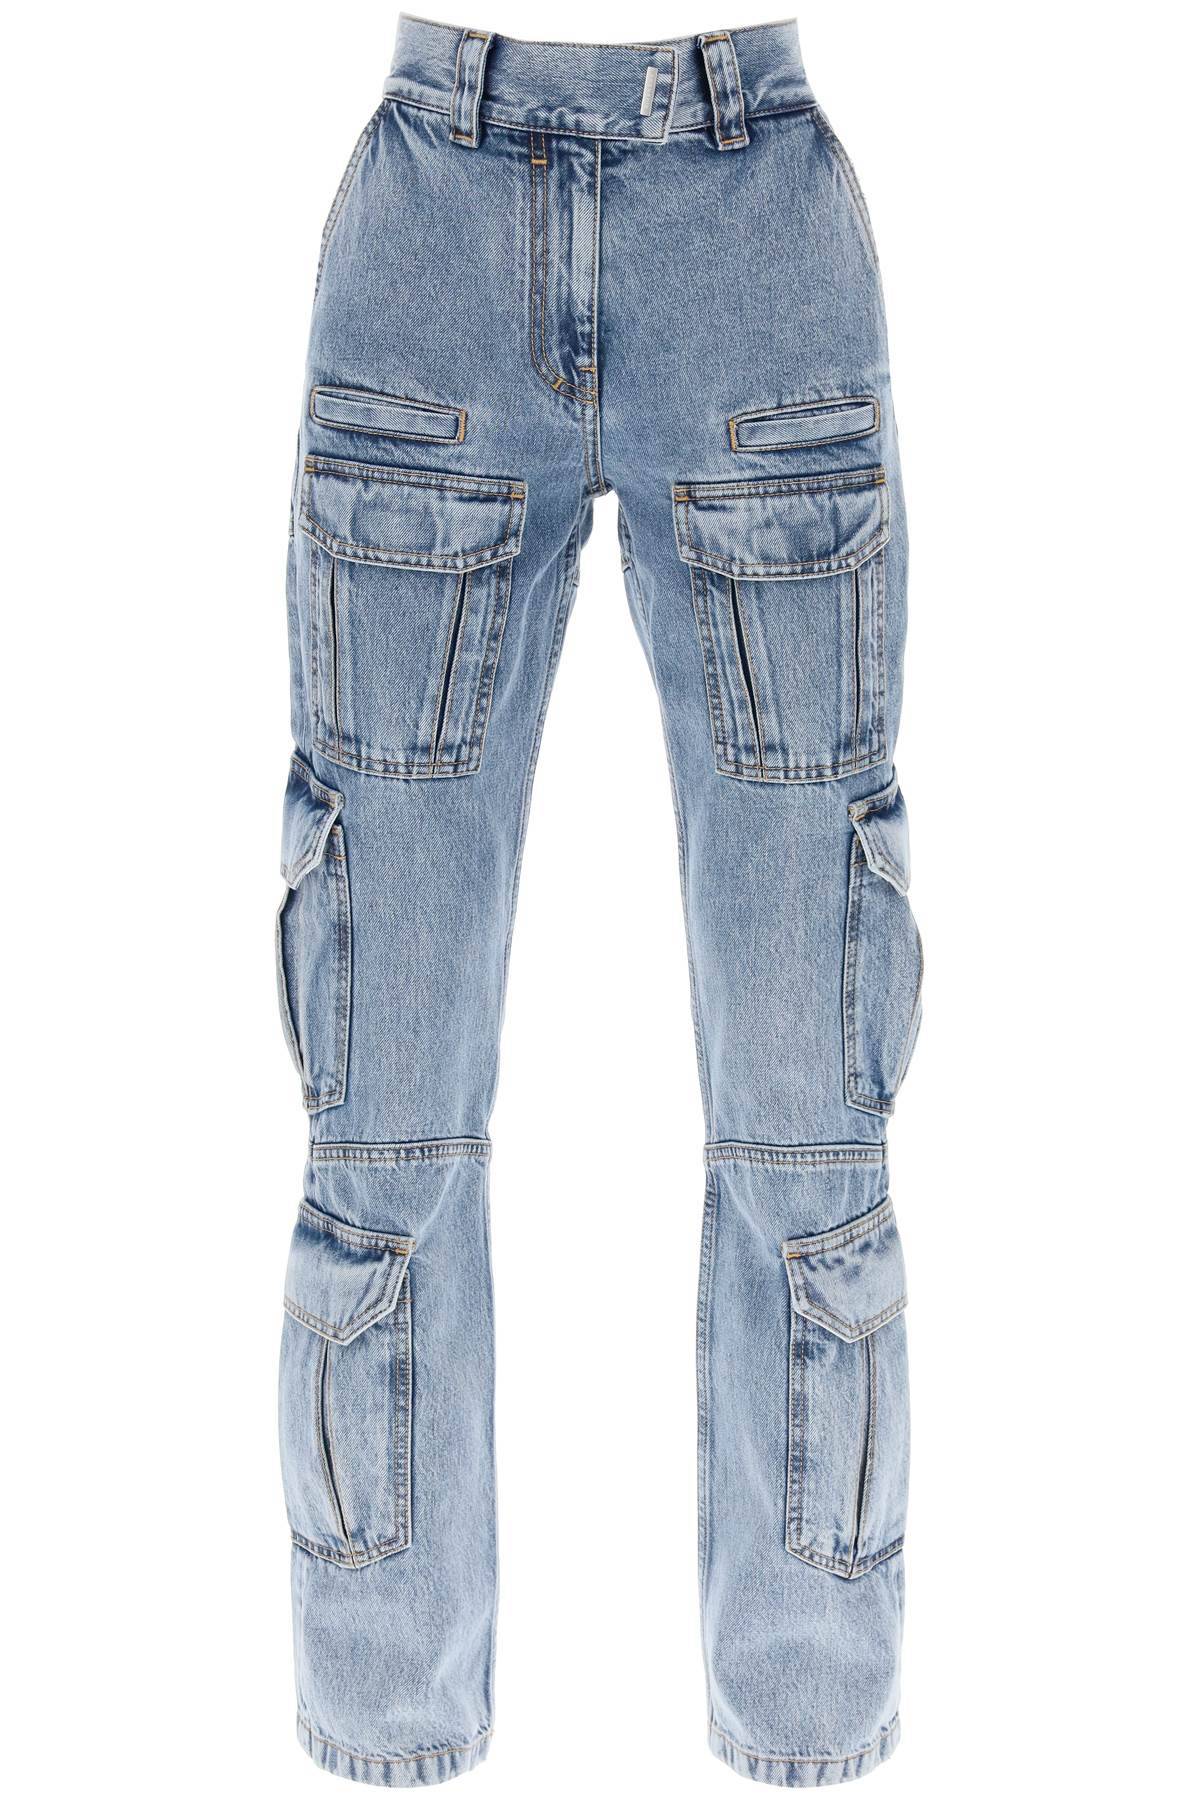 Givenchy GIVENCHY bootcut cargo jeans